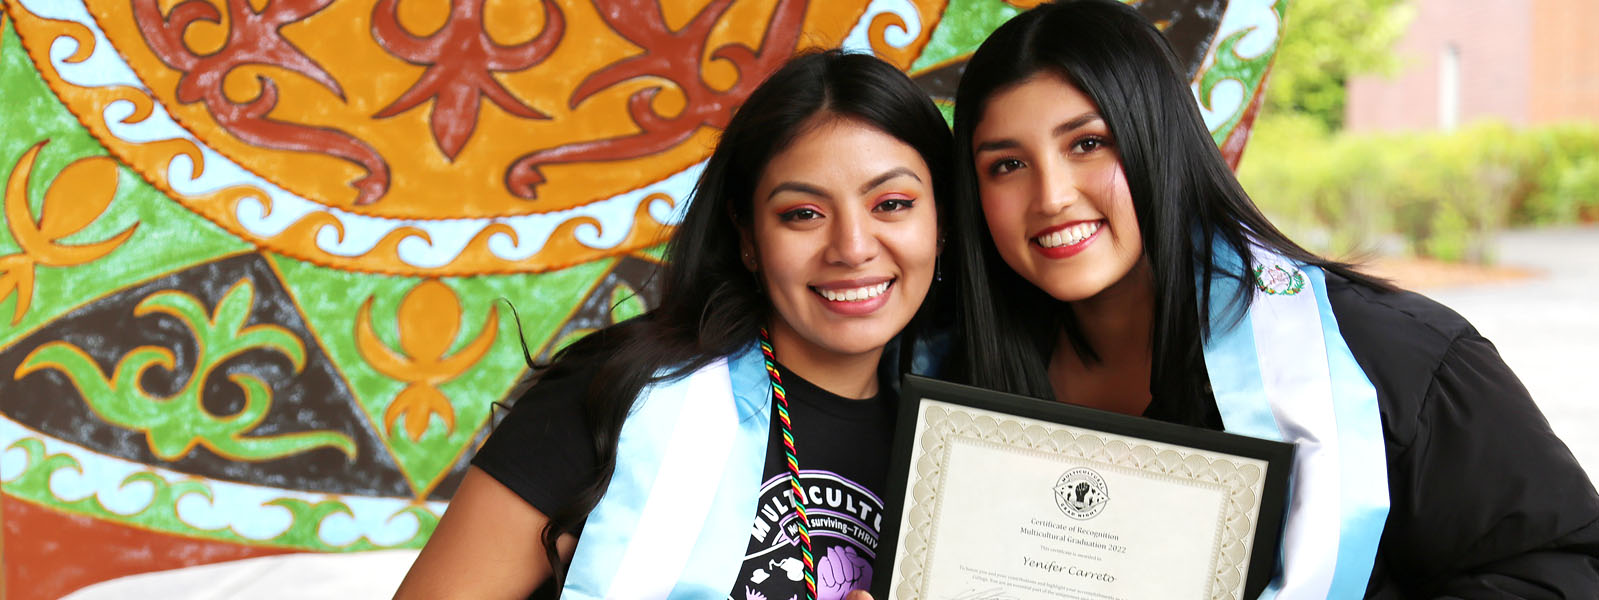 Two Latina Women standing in front of a colorful banner with Blue Stolls around their necks and holding Certificates for the Multicultural graduation recognition